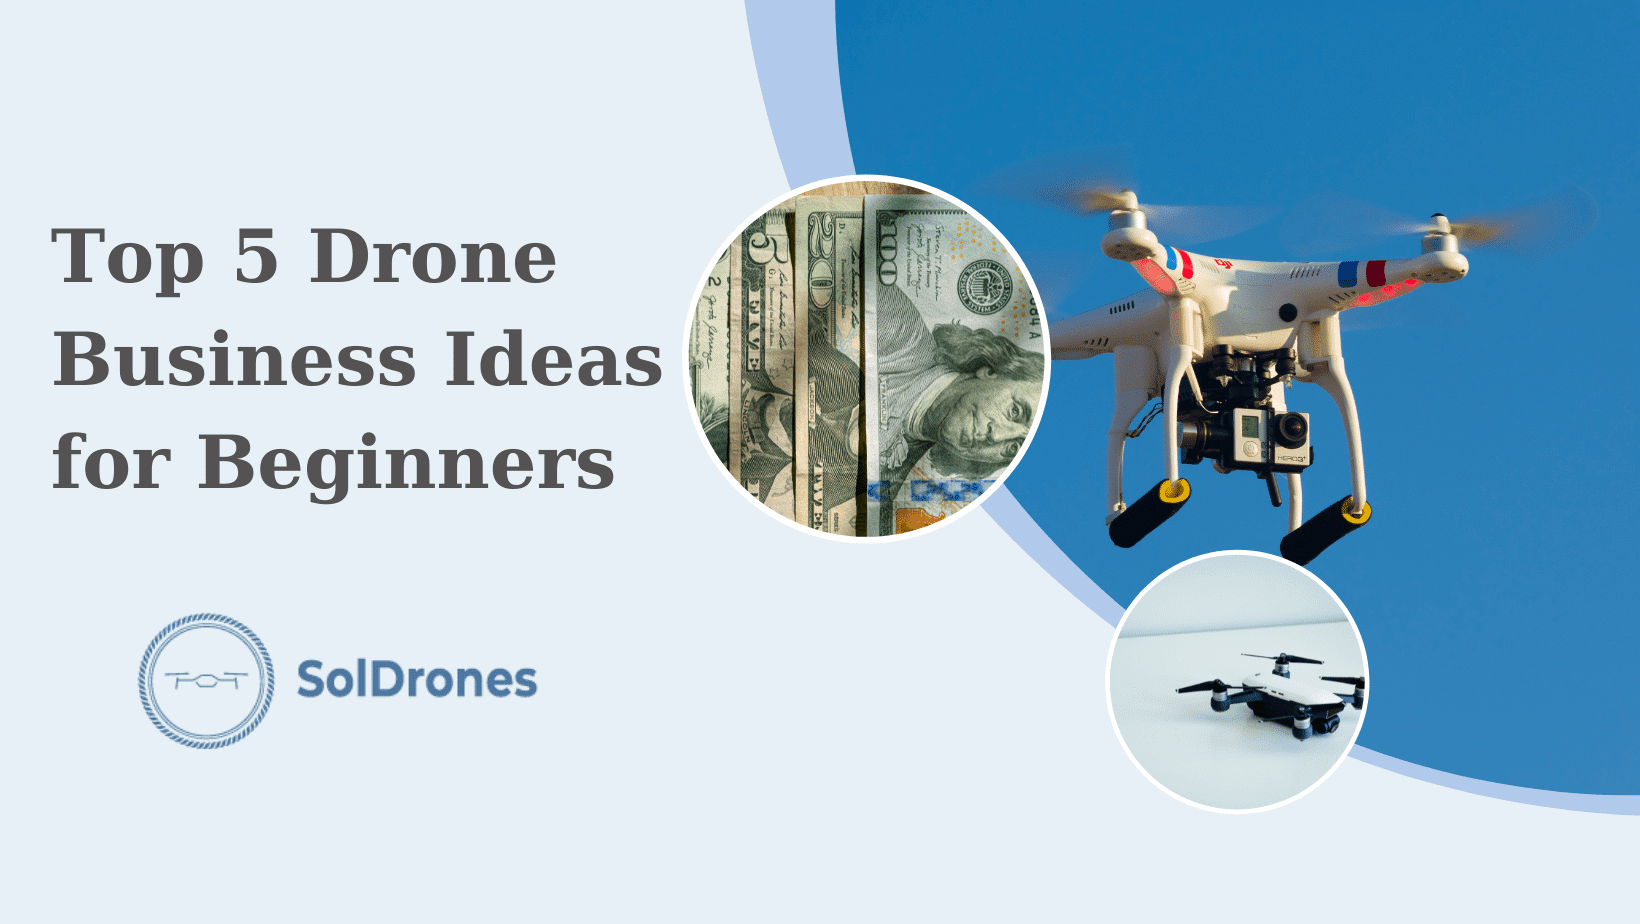 Top 5 Drone Business Ideas for Beginners